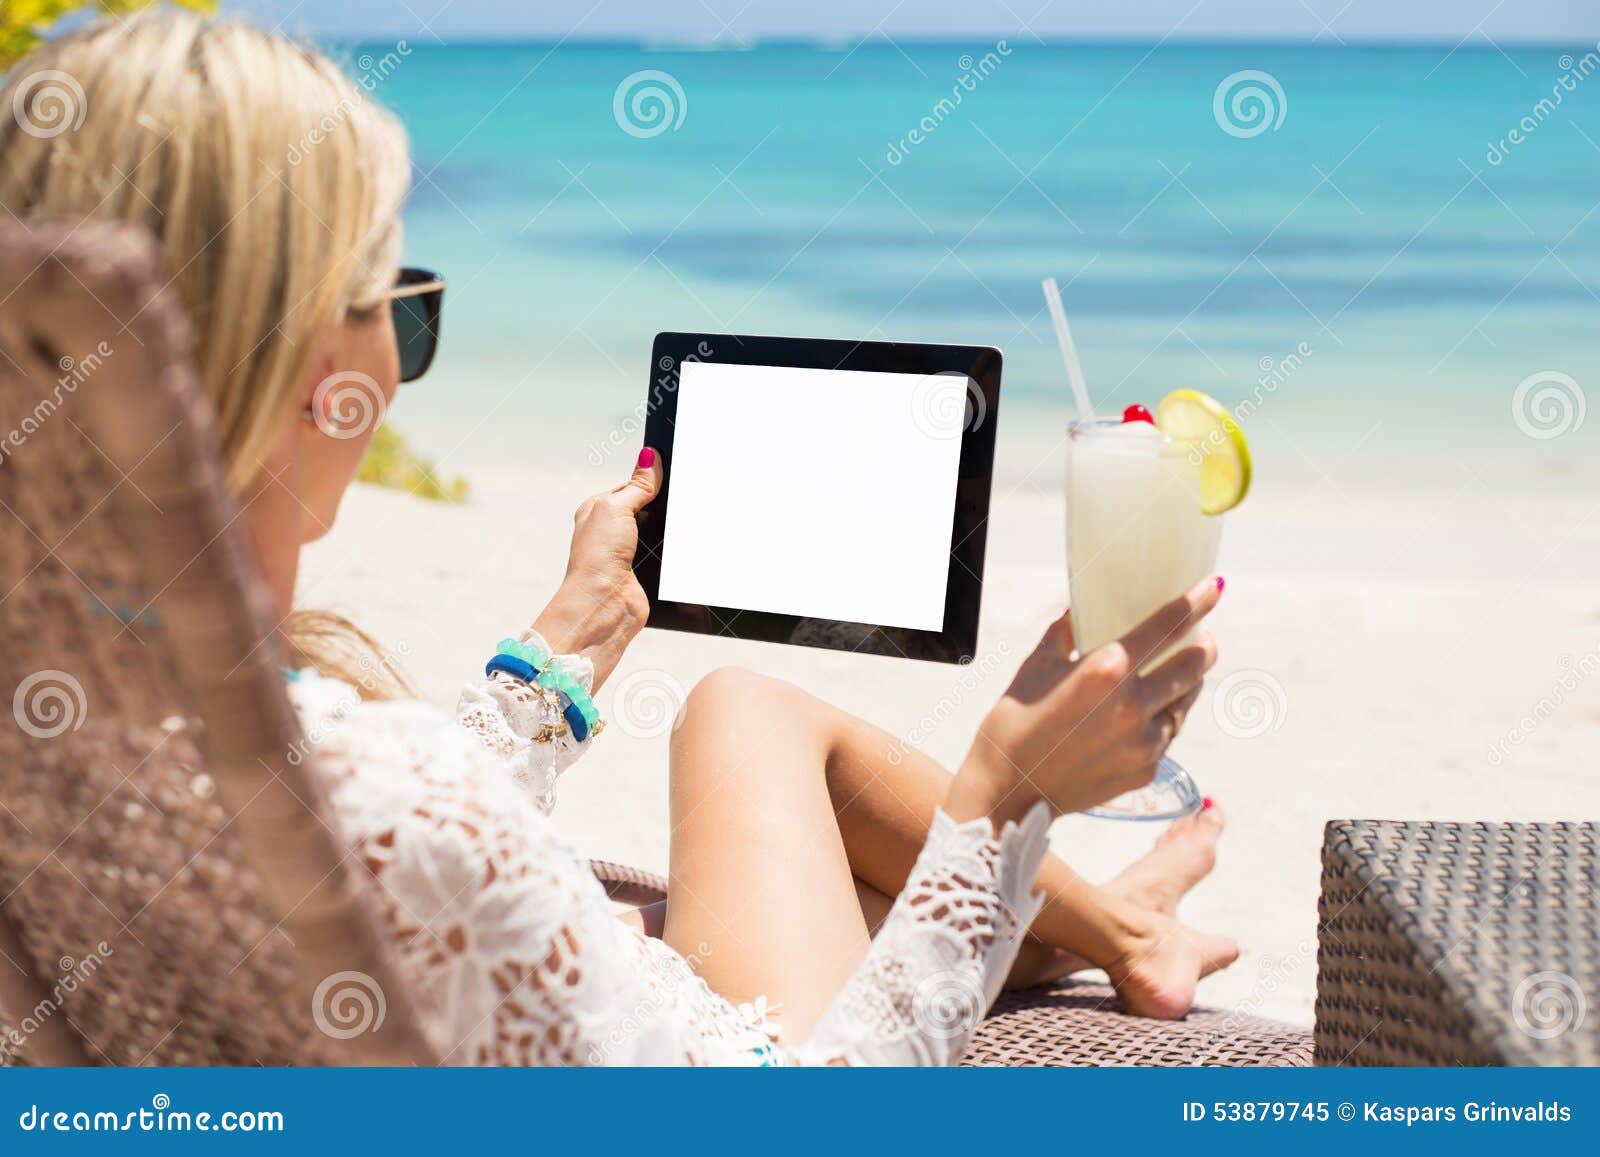 relaxed woman using tablet computer on the beach